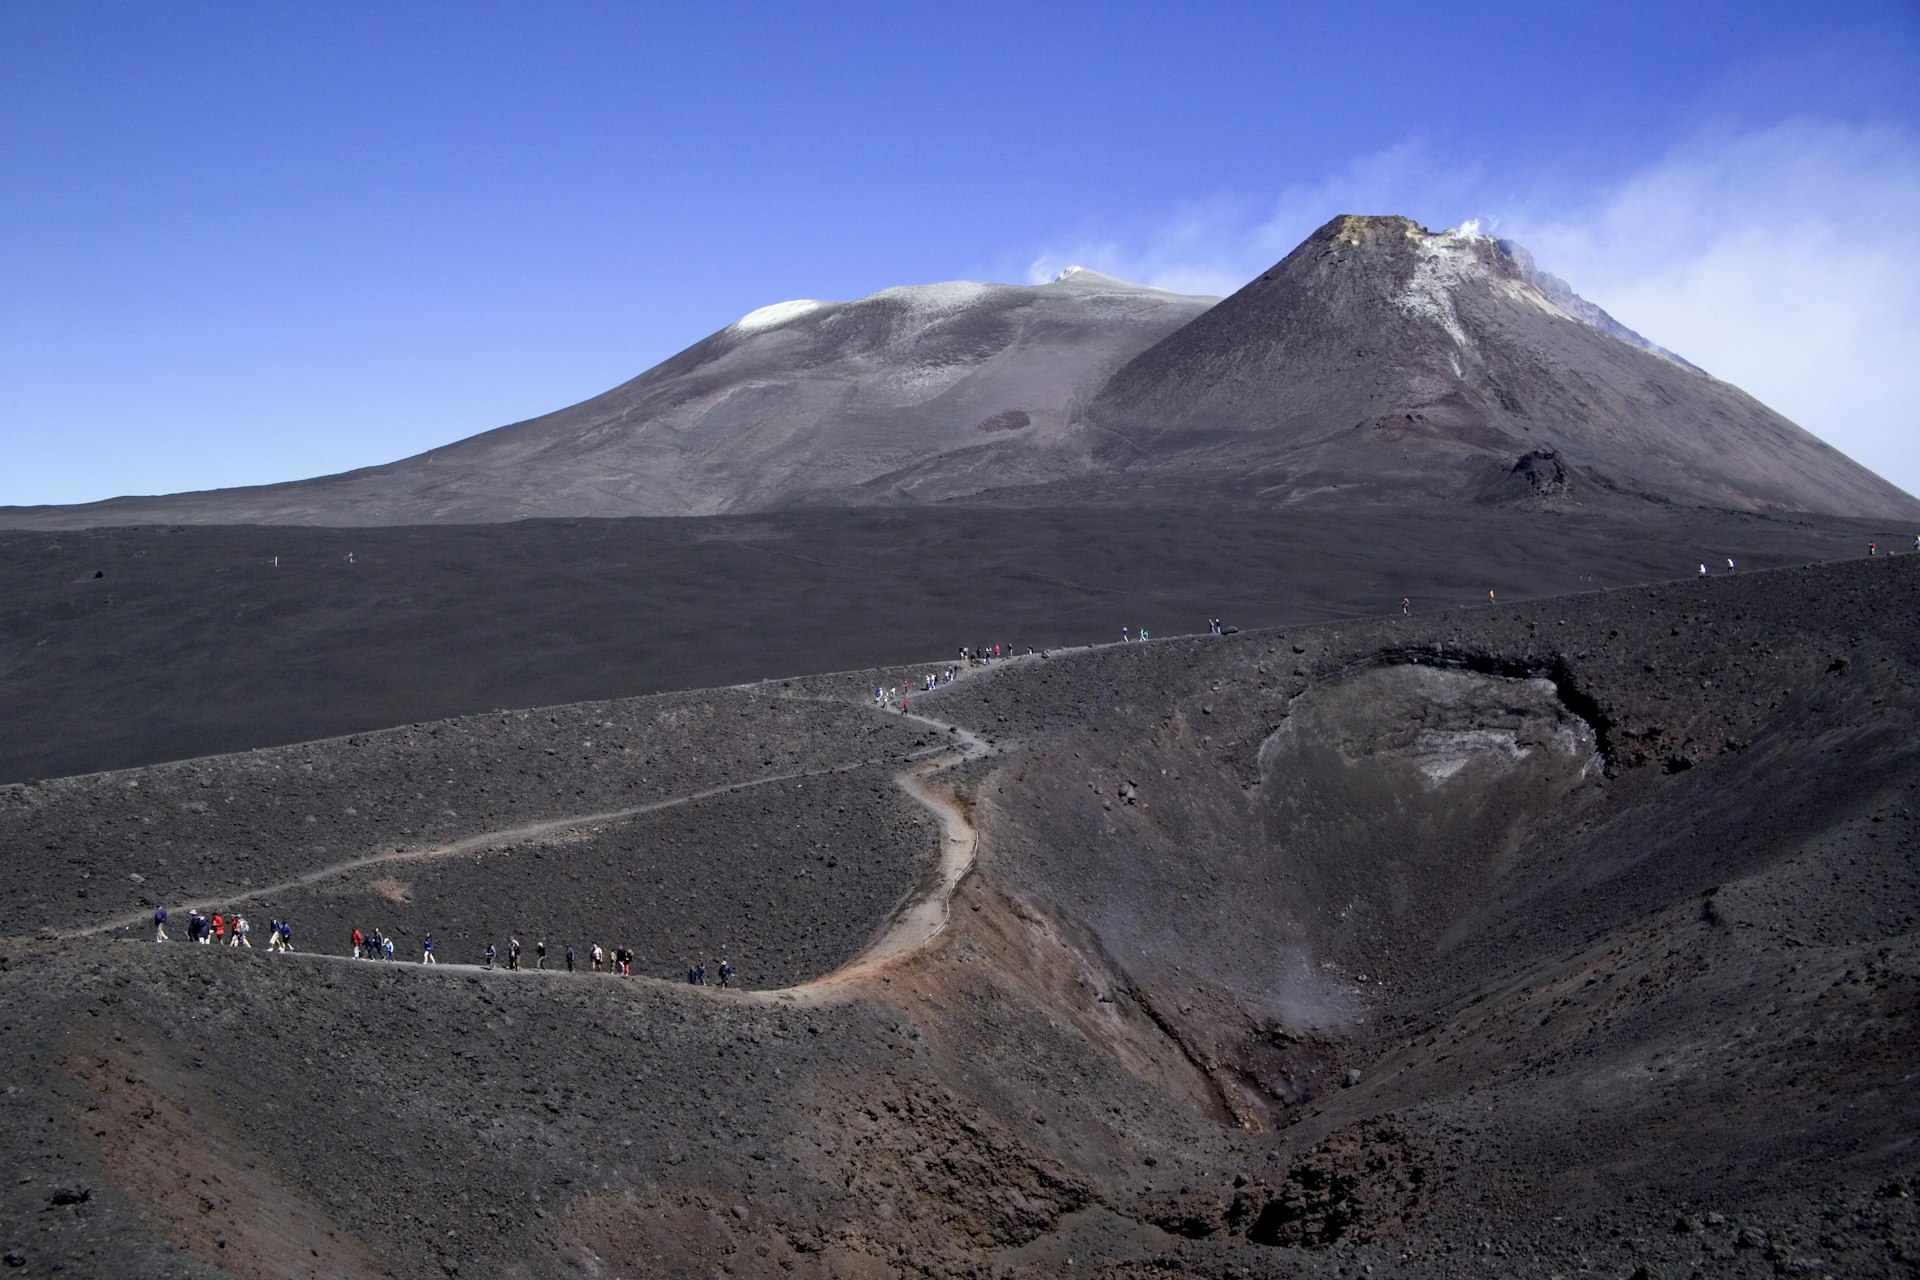 Groups of hiker walk the winding track to the blackened summit of Mount Etna in Sicily, Italy. The ash black volcano is contrasted against a clear blue sky.